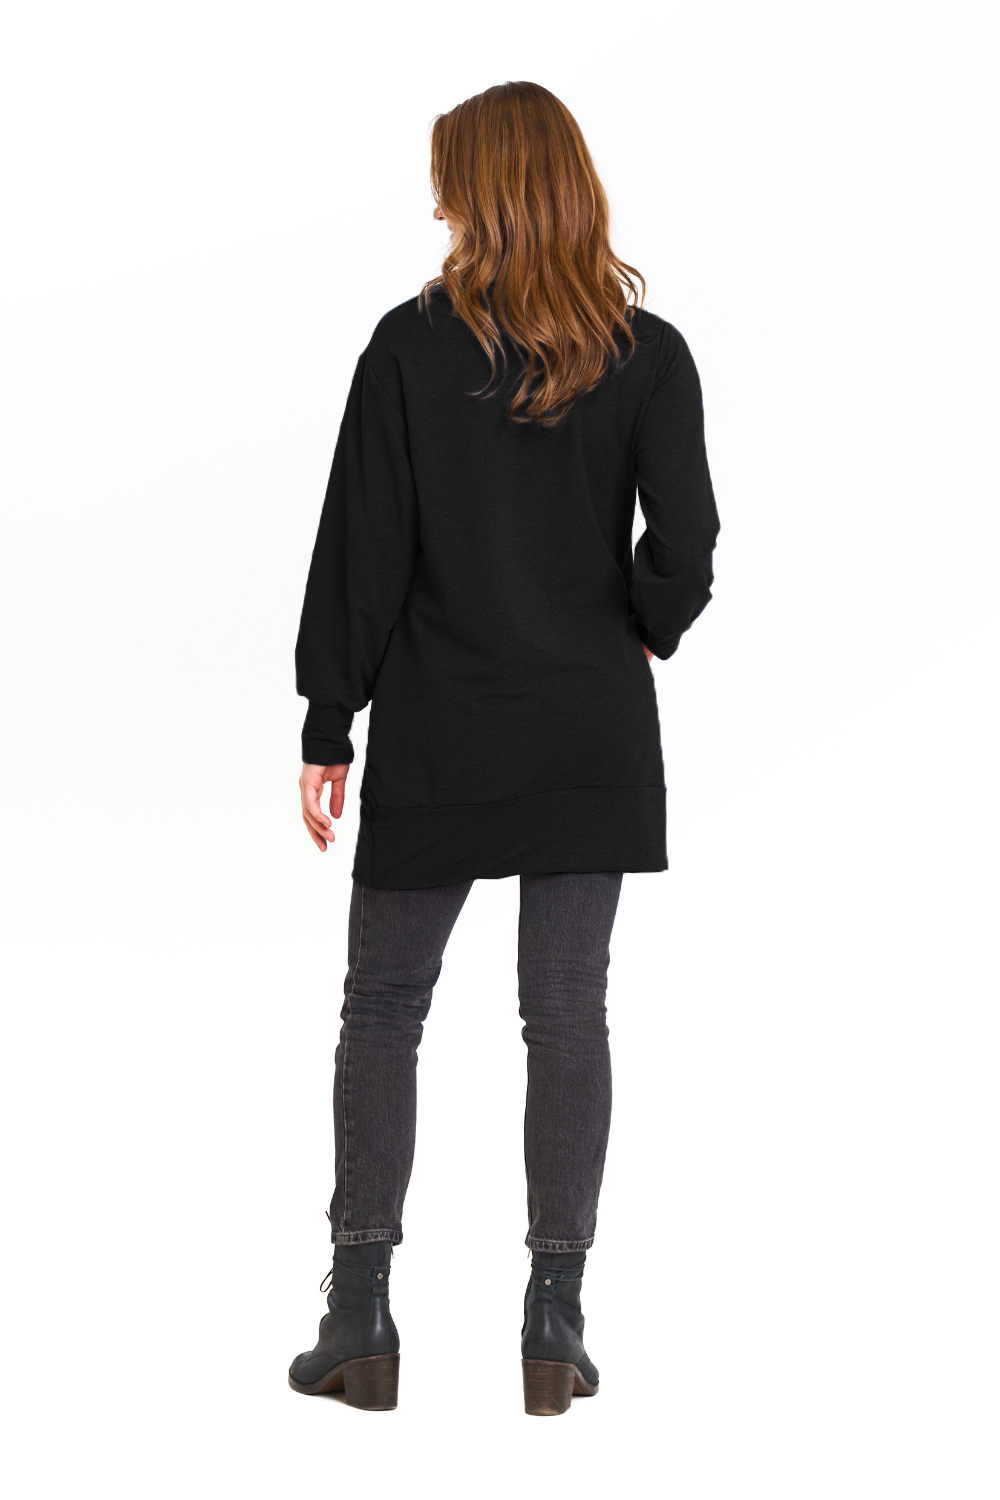 May Sweatshirt by EMK, Black, back view, cowl neck, balloon sleeves, band at hem, tunic-length, eco-fabric, bamboo rayon, cotton, sizes S-L, made in Winnipeg